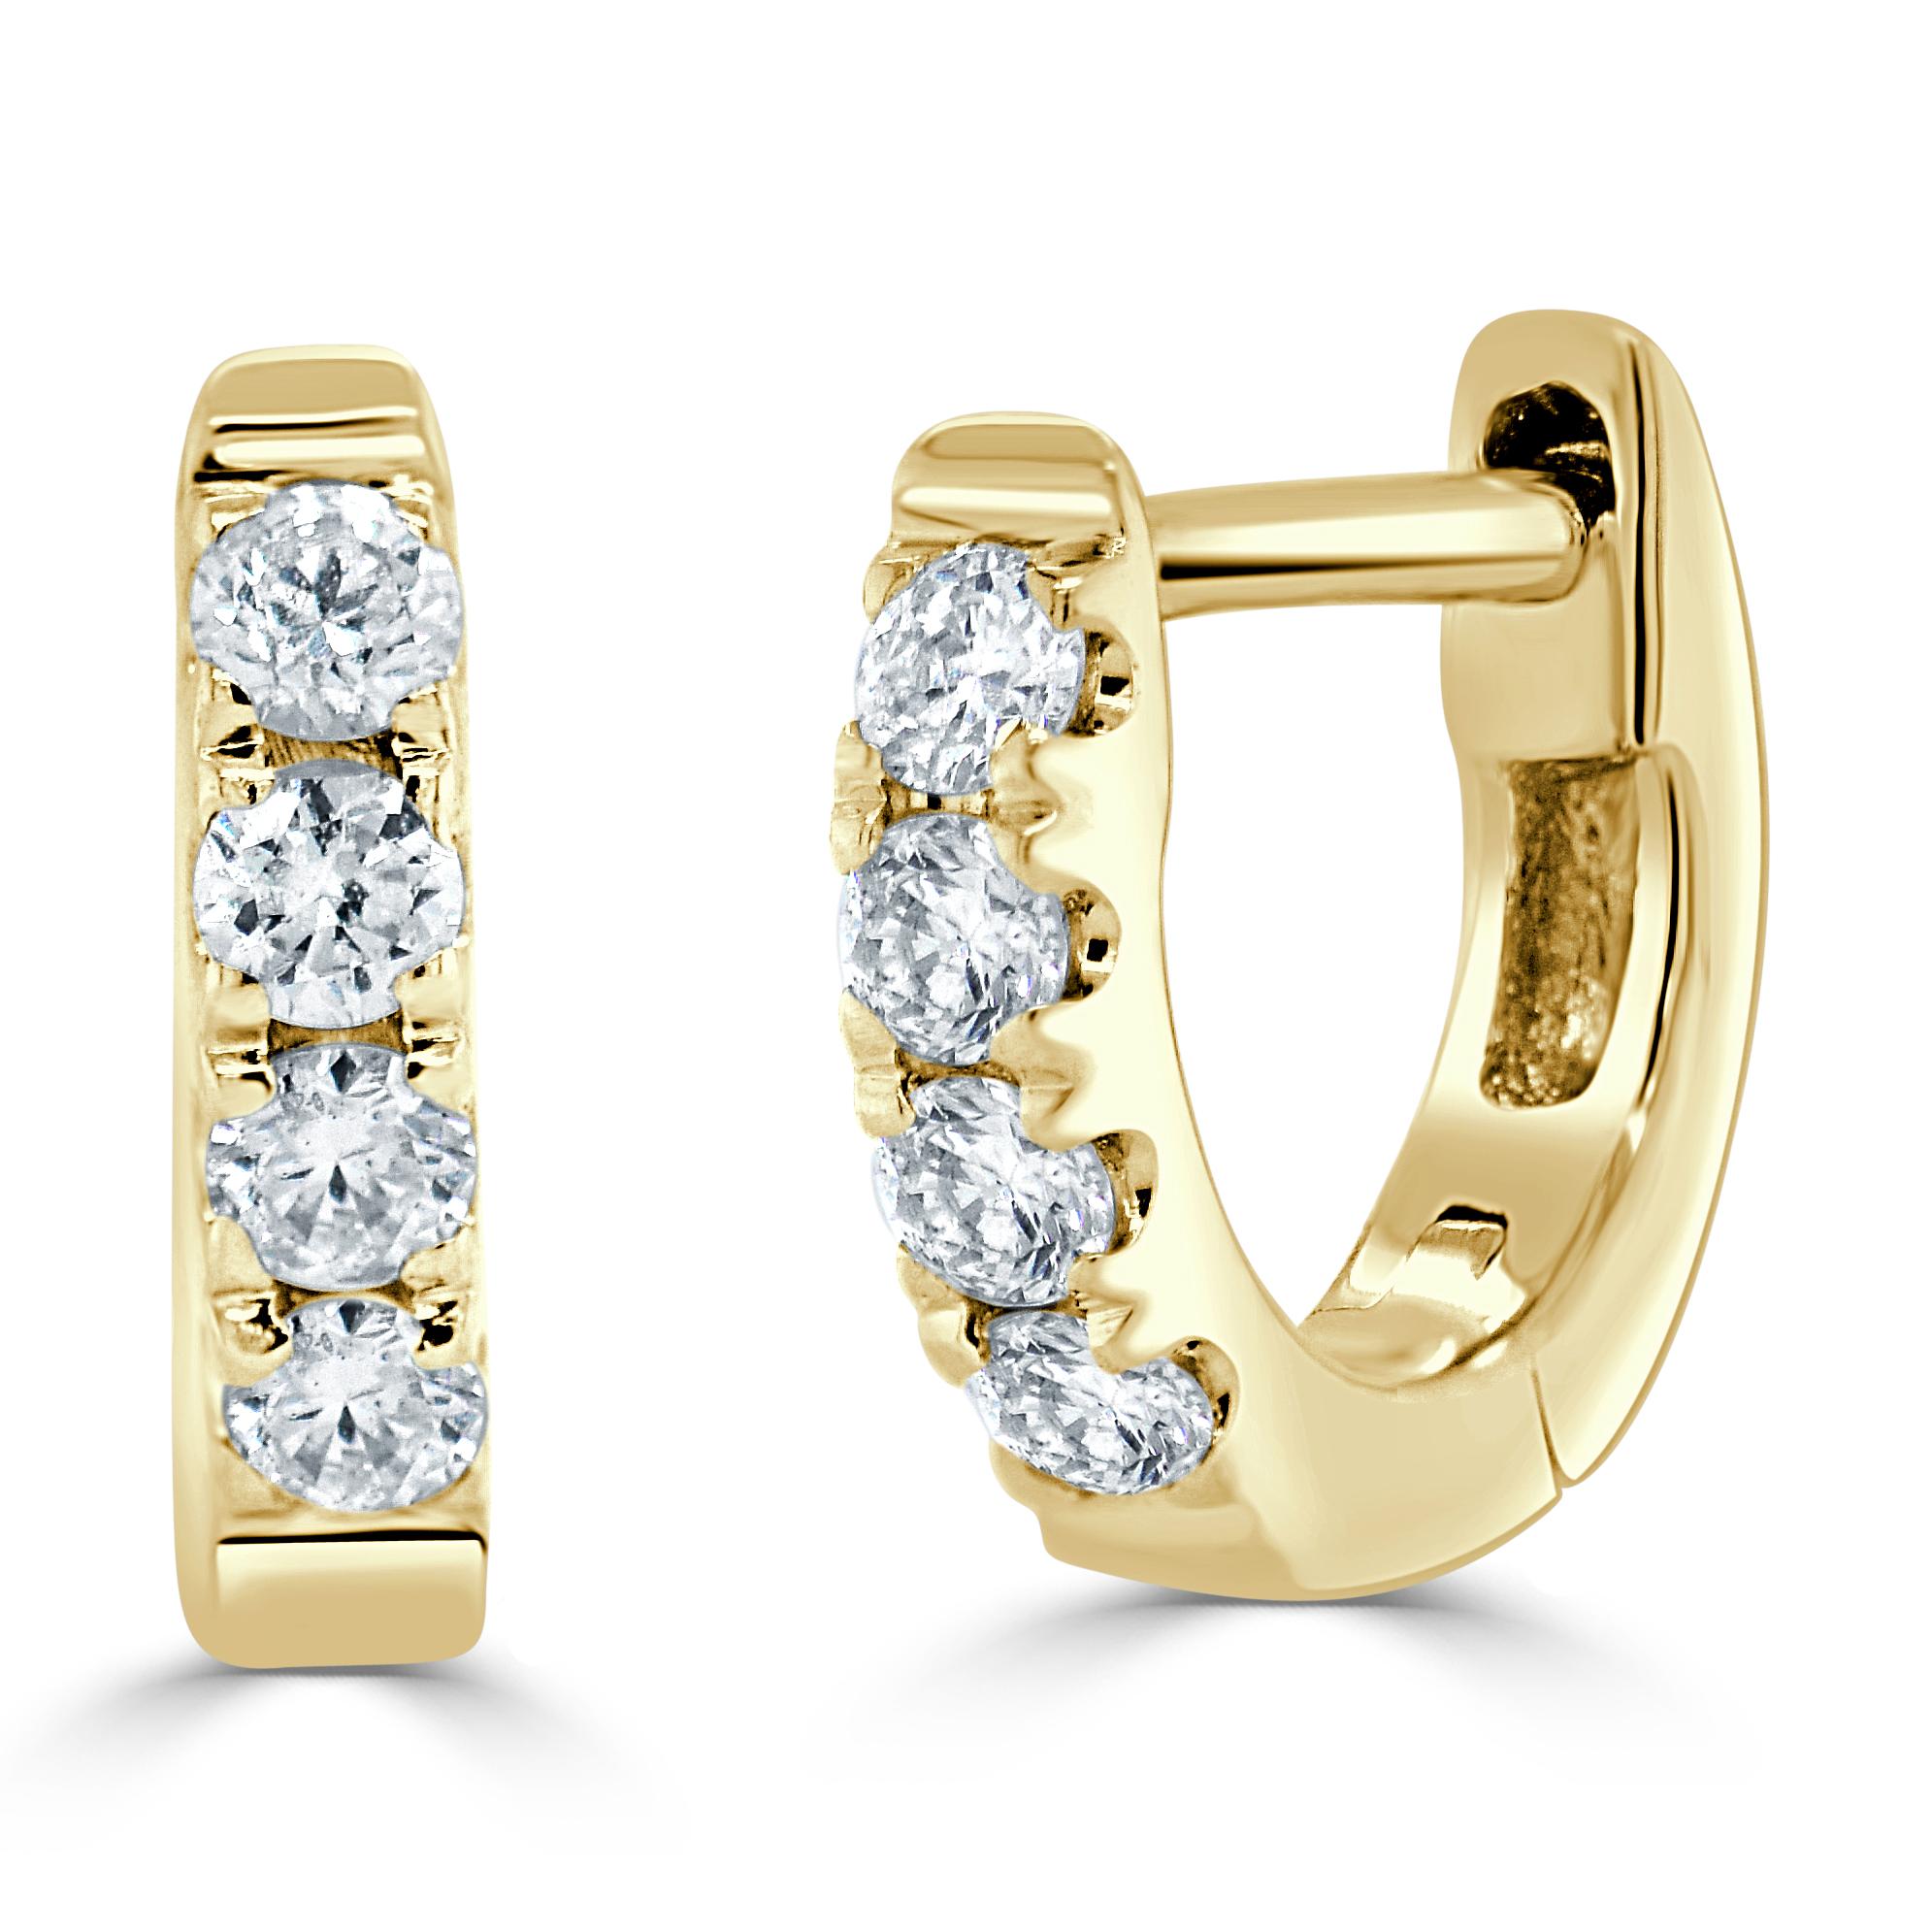 14 Karat Yellow Gold 0.12 Carat Diamond Huggie Hoop Earrings
Quality Earrings Set: Made from real 14k gold and glittering white approximately 0.12 ct. Certified diamonds, featuring a single line of white diamonds with a color and clarity of